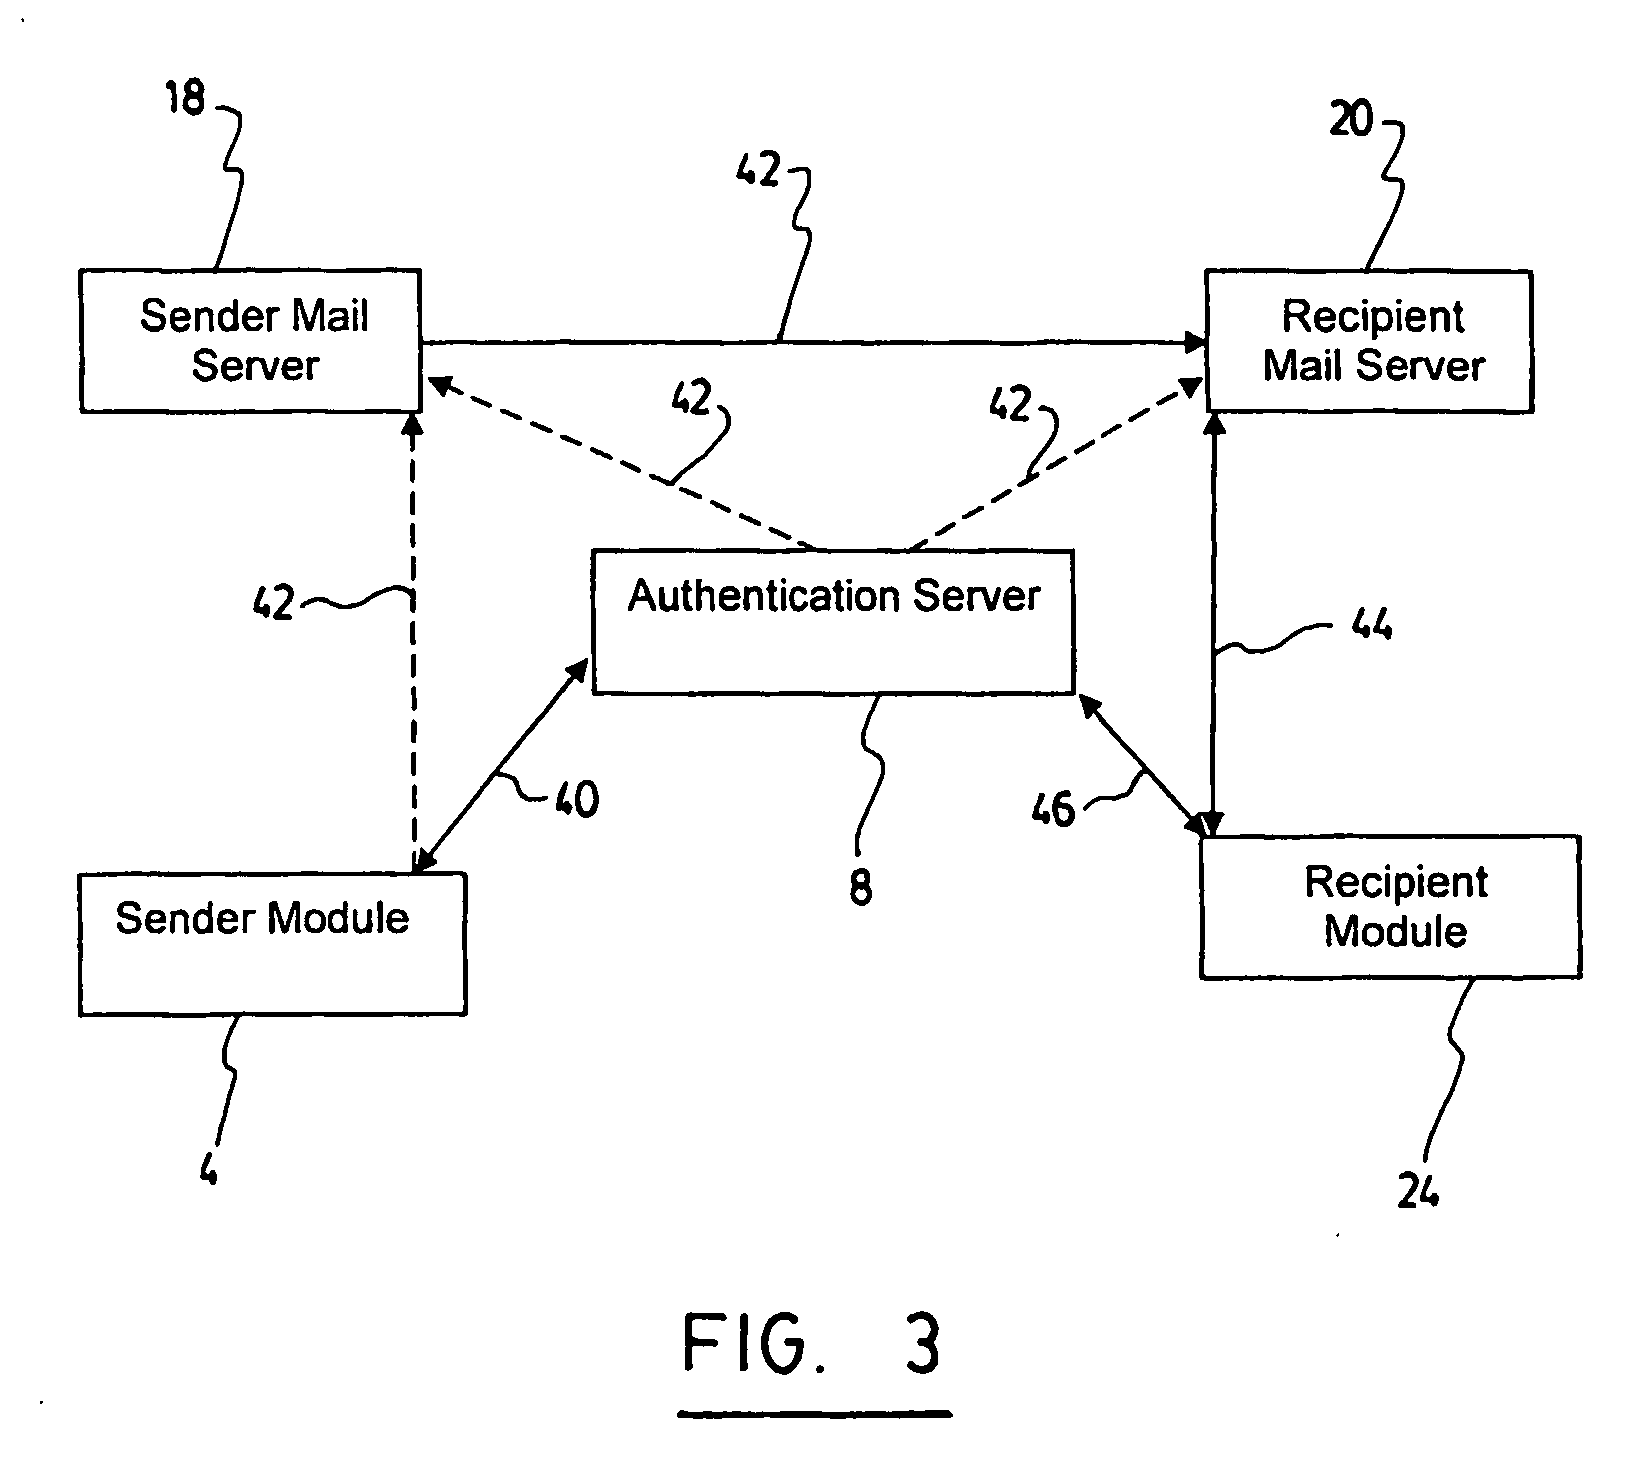 System and method for warranting electronic mail using a hybrid public key encryption scheme